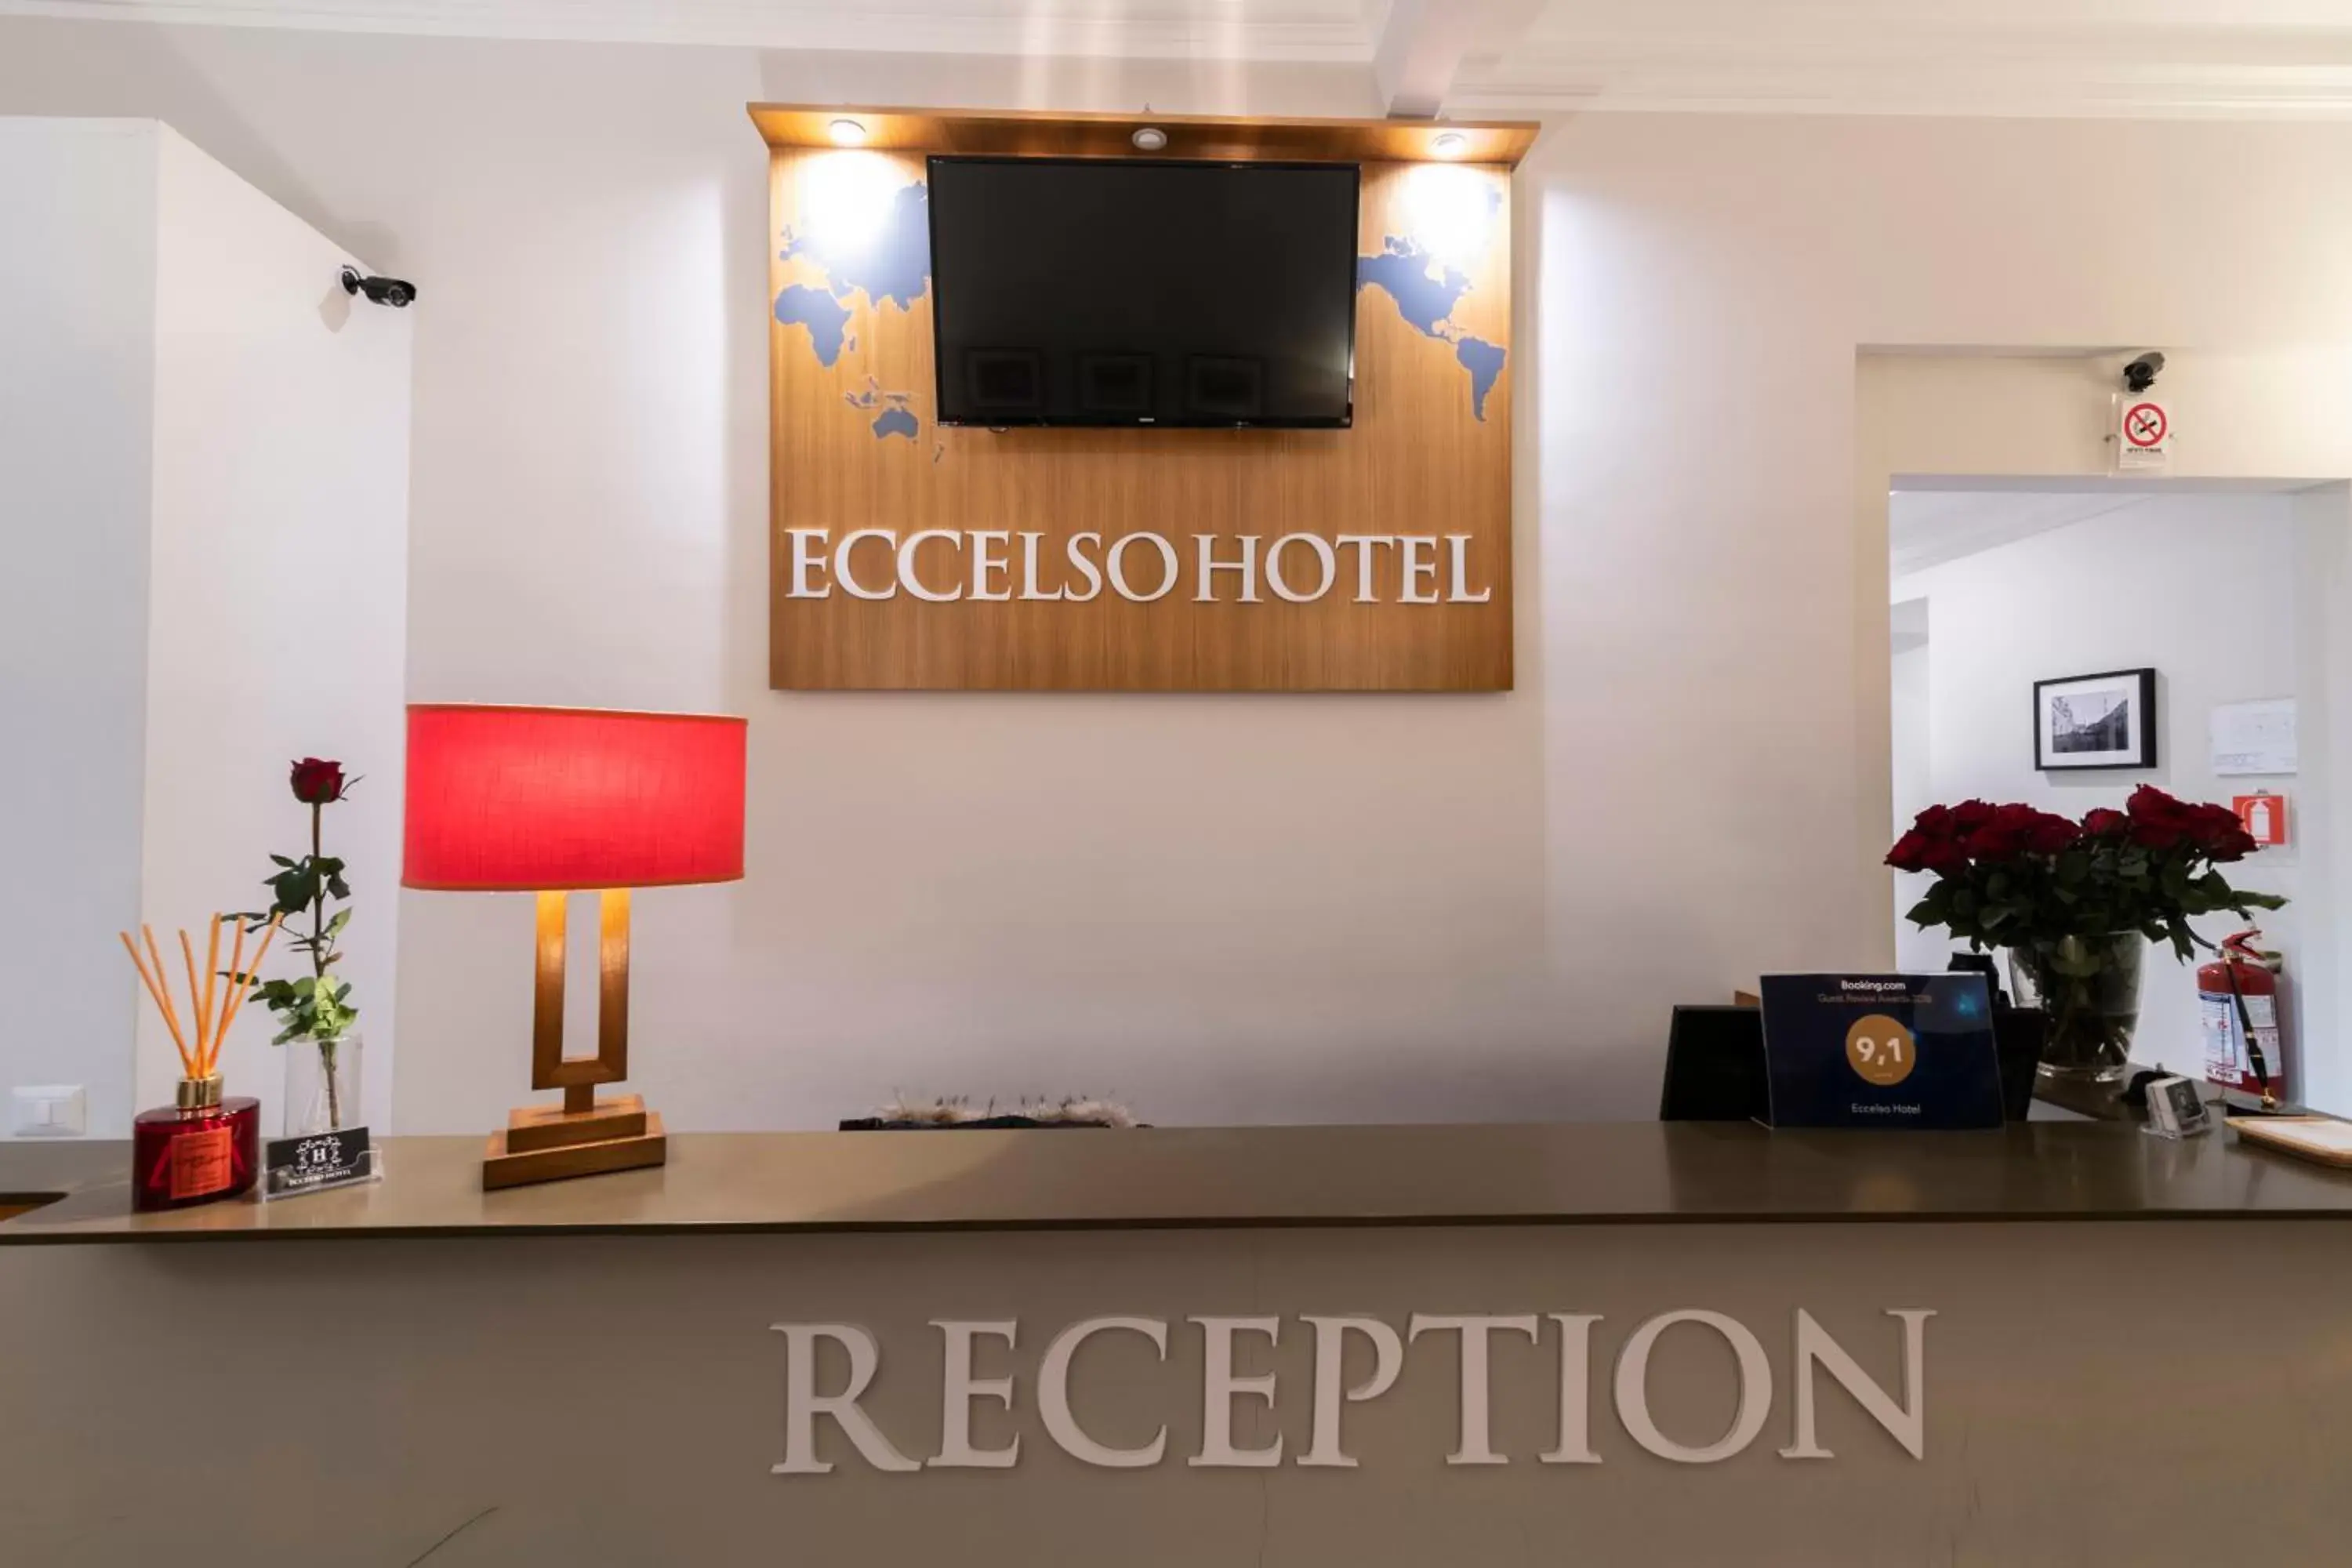 Property logo or sign in Eccelso Hotel